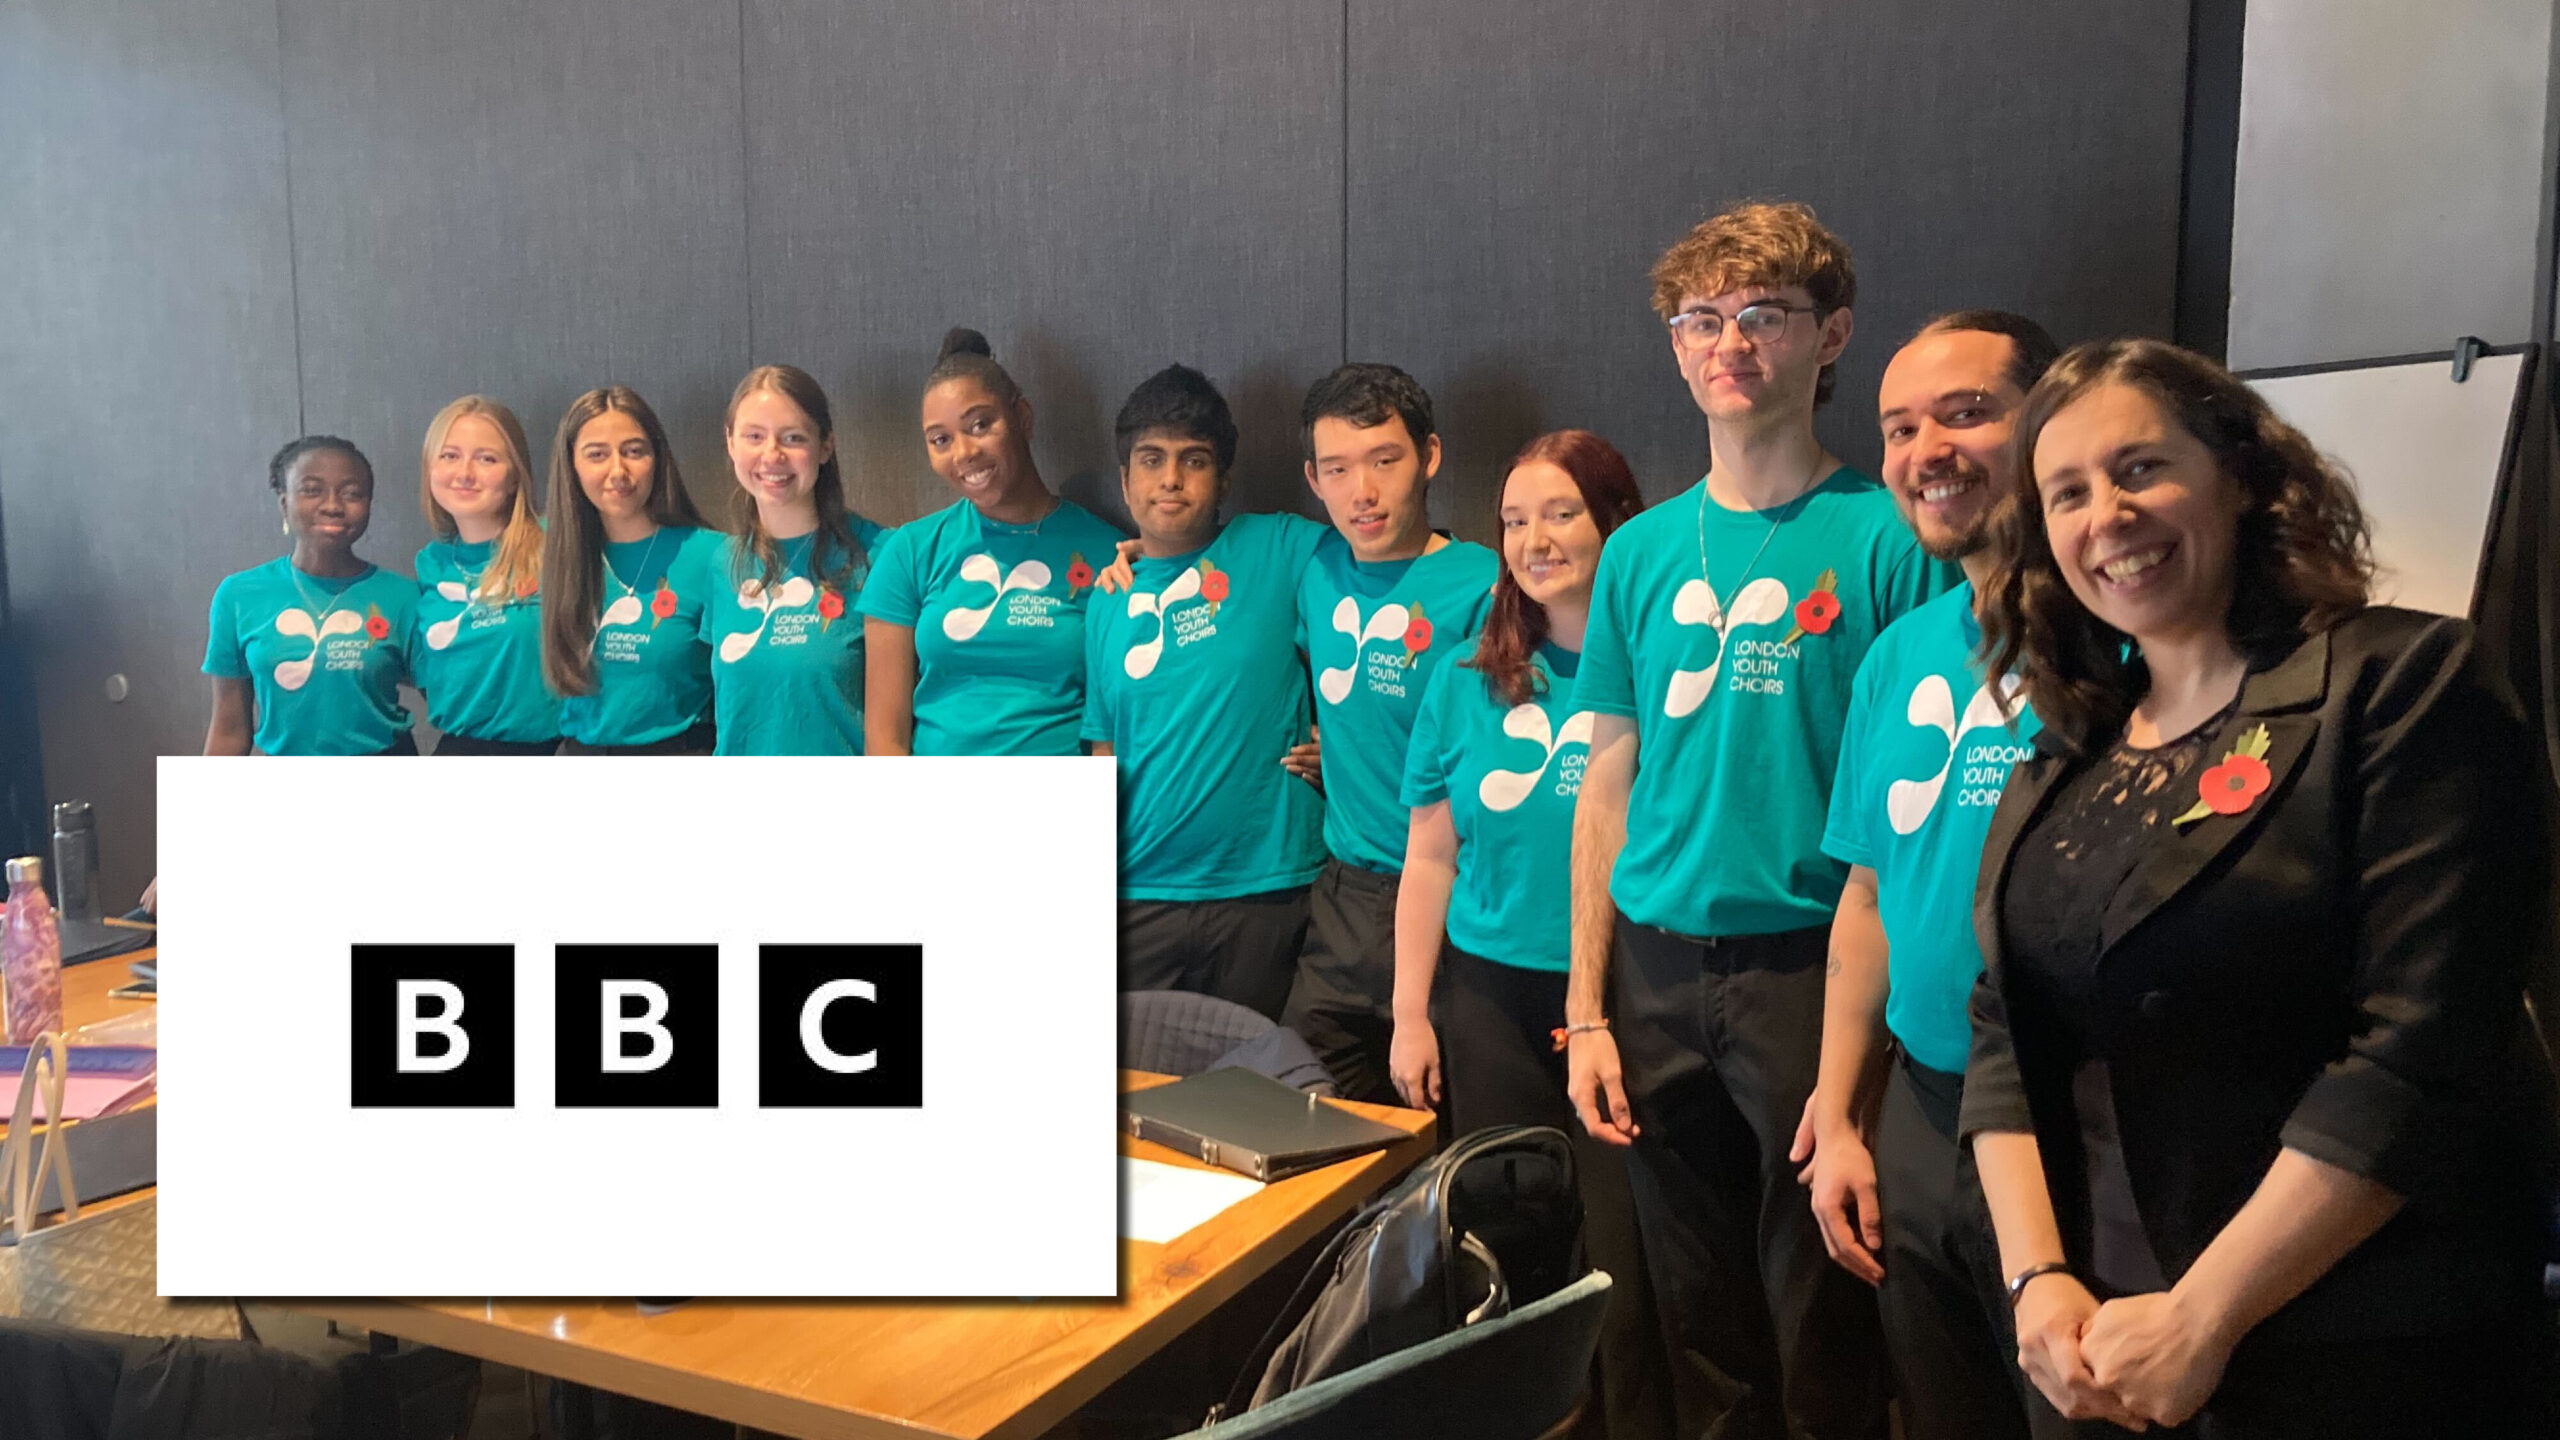 10 Chamber Choir members in Teal T shirts, wearing poppies, with Rachel Staunton on the right dressed in black with a poppy. A black and white BBC logo is in the bottom left of the image.